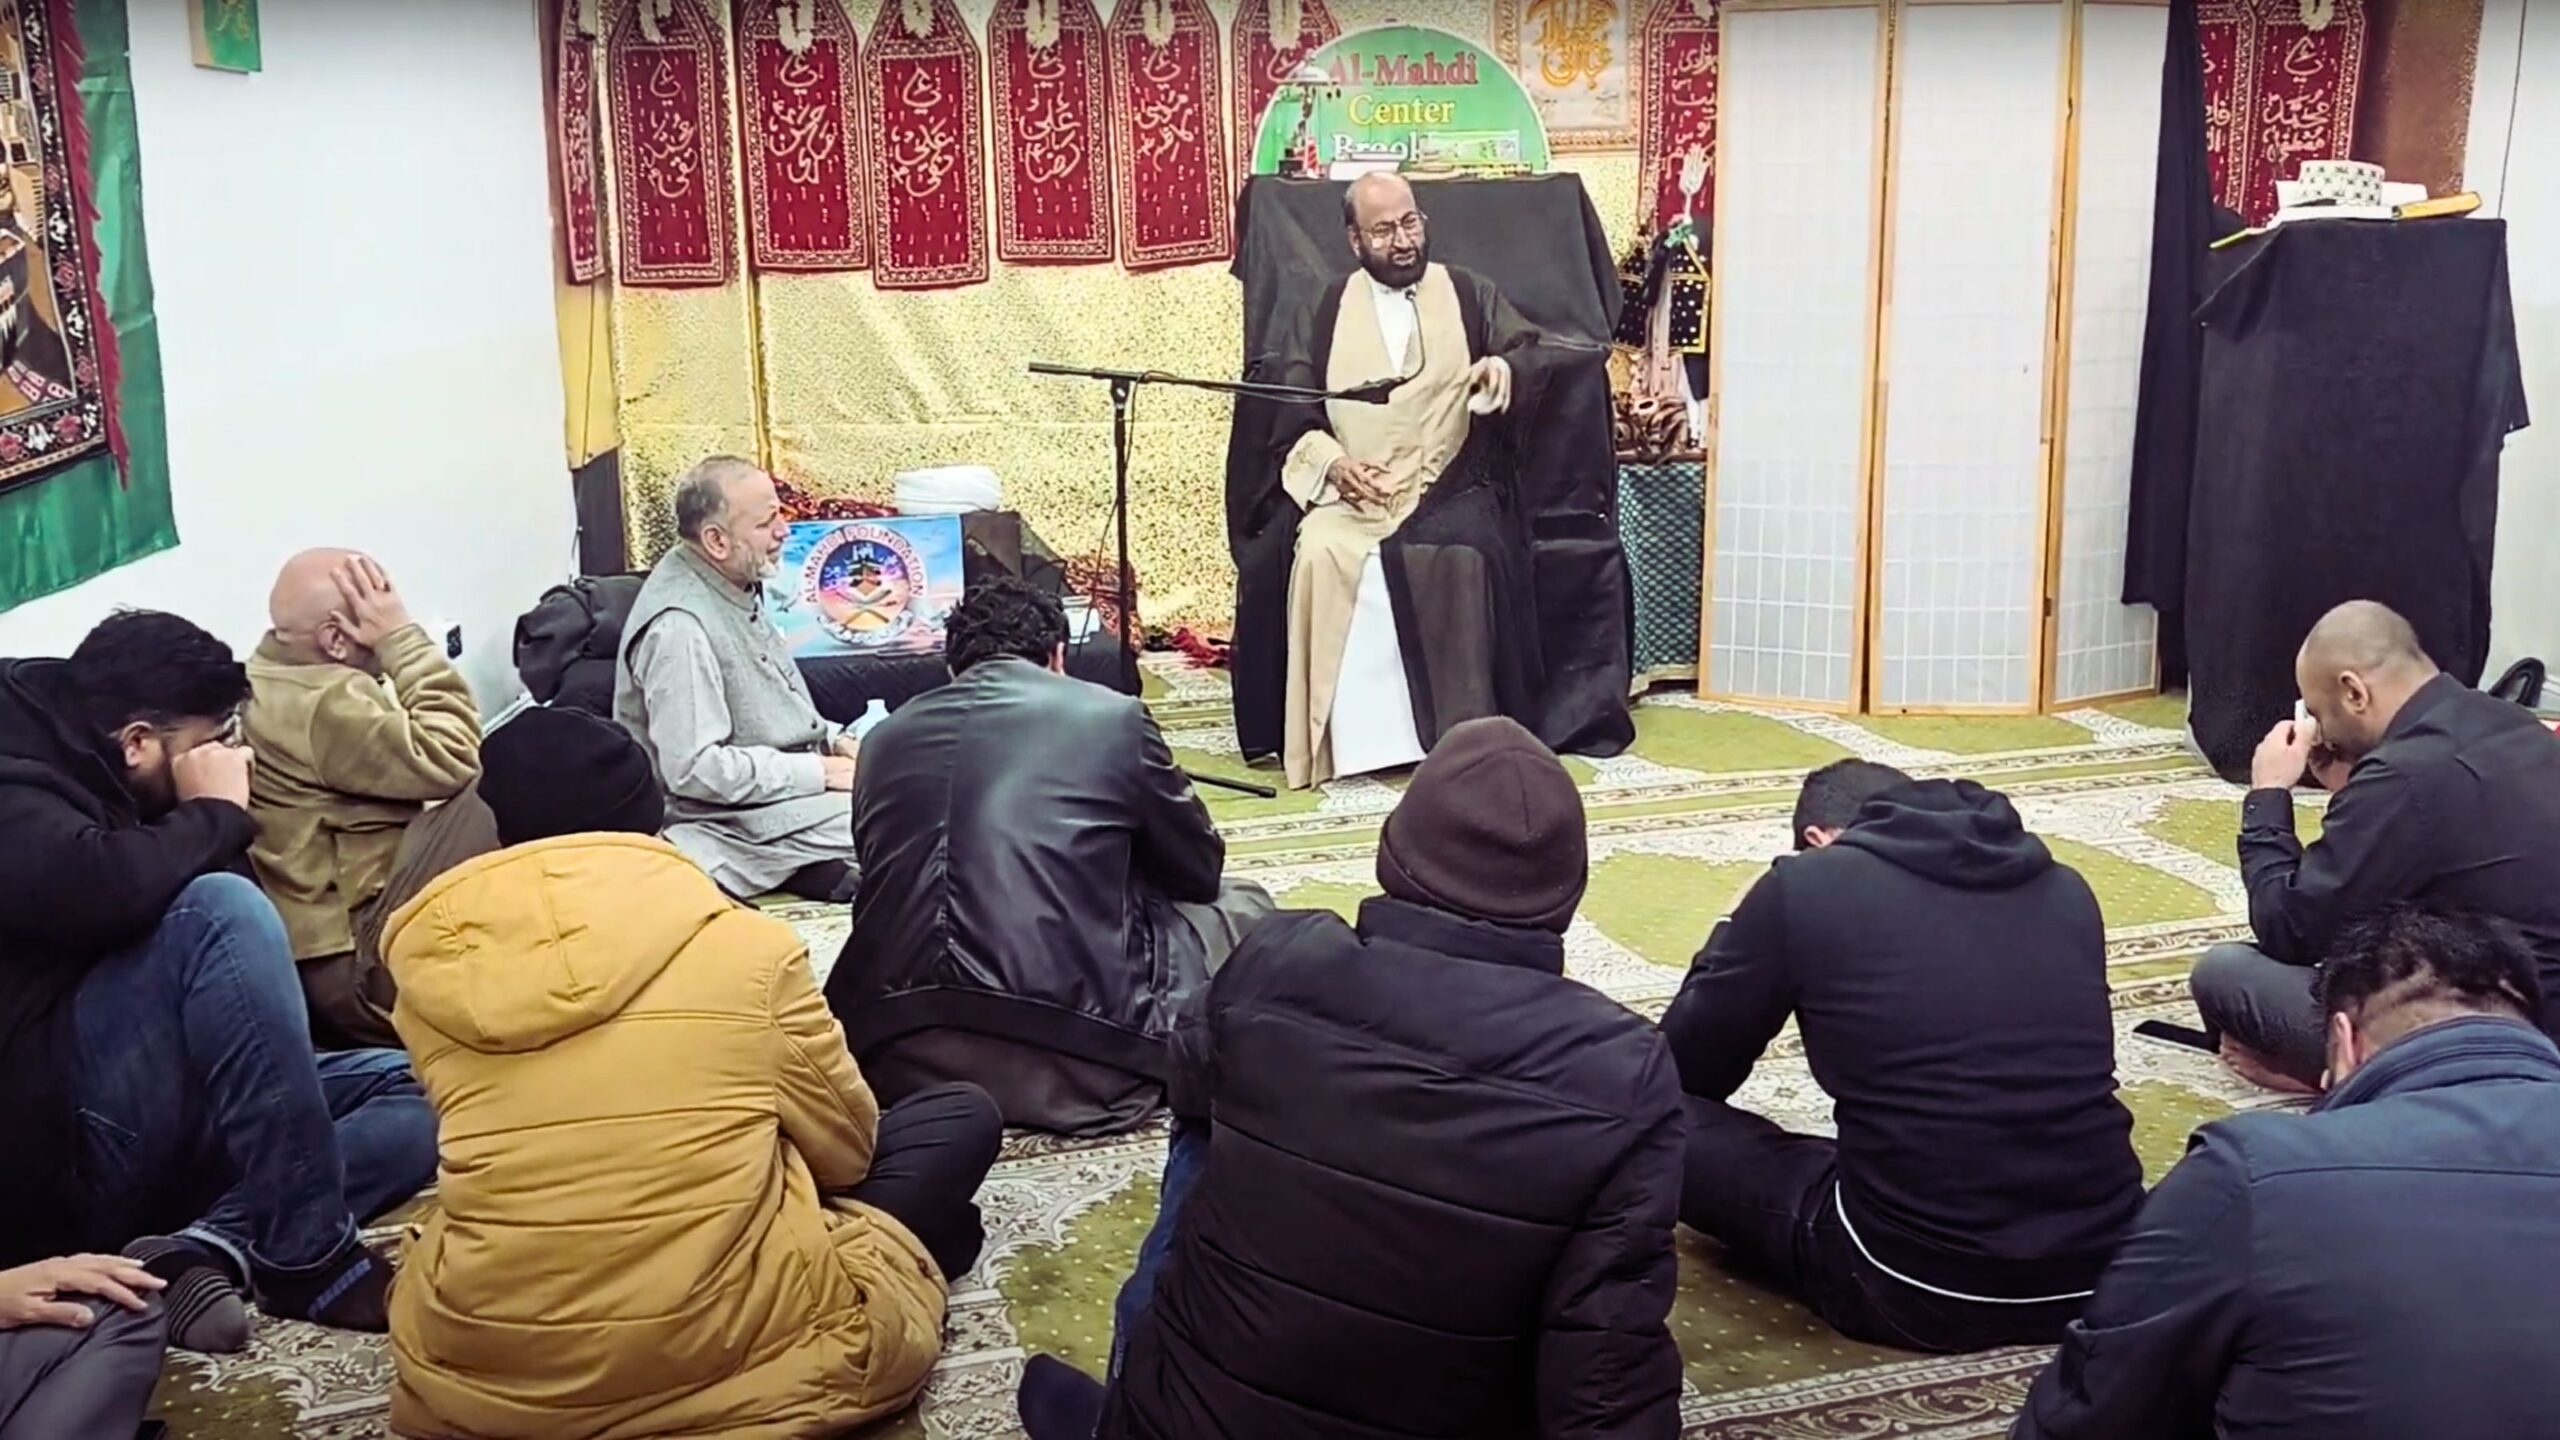 Why Songs of Zainab Moved This Shia Congregation in Brooklyn to Tears